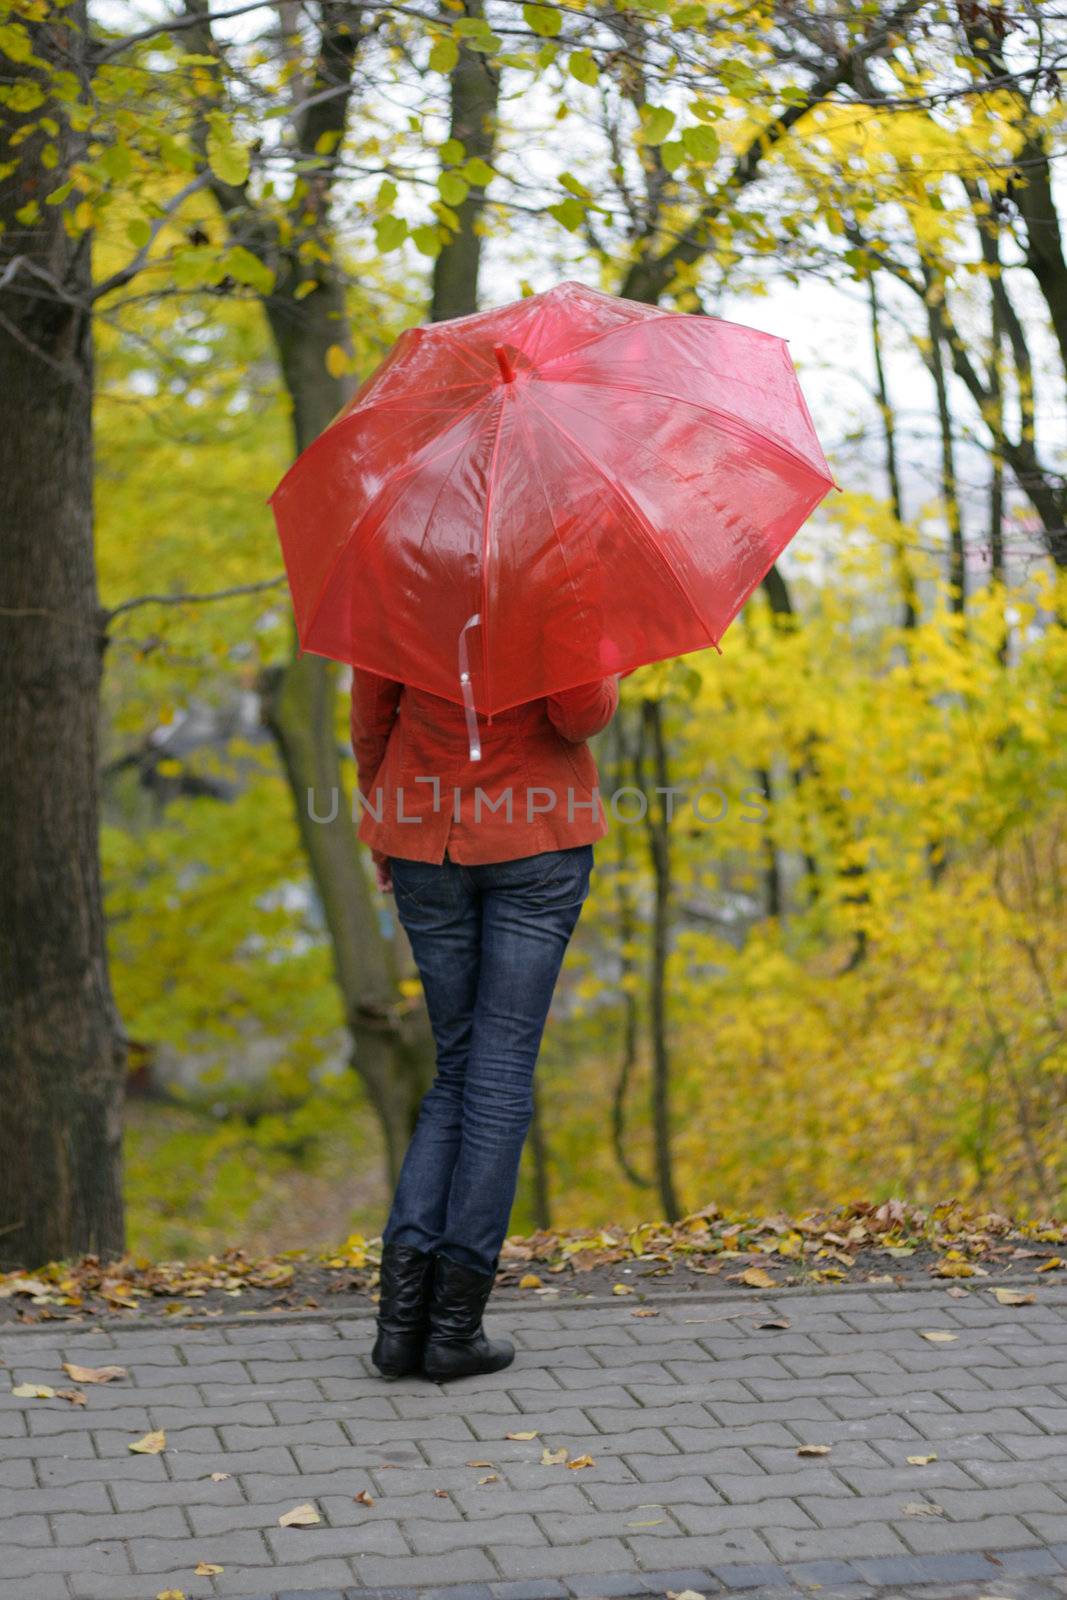 The girl with a red umbrella by KadunmatriX